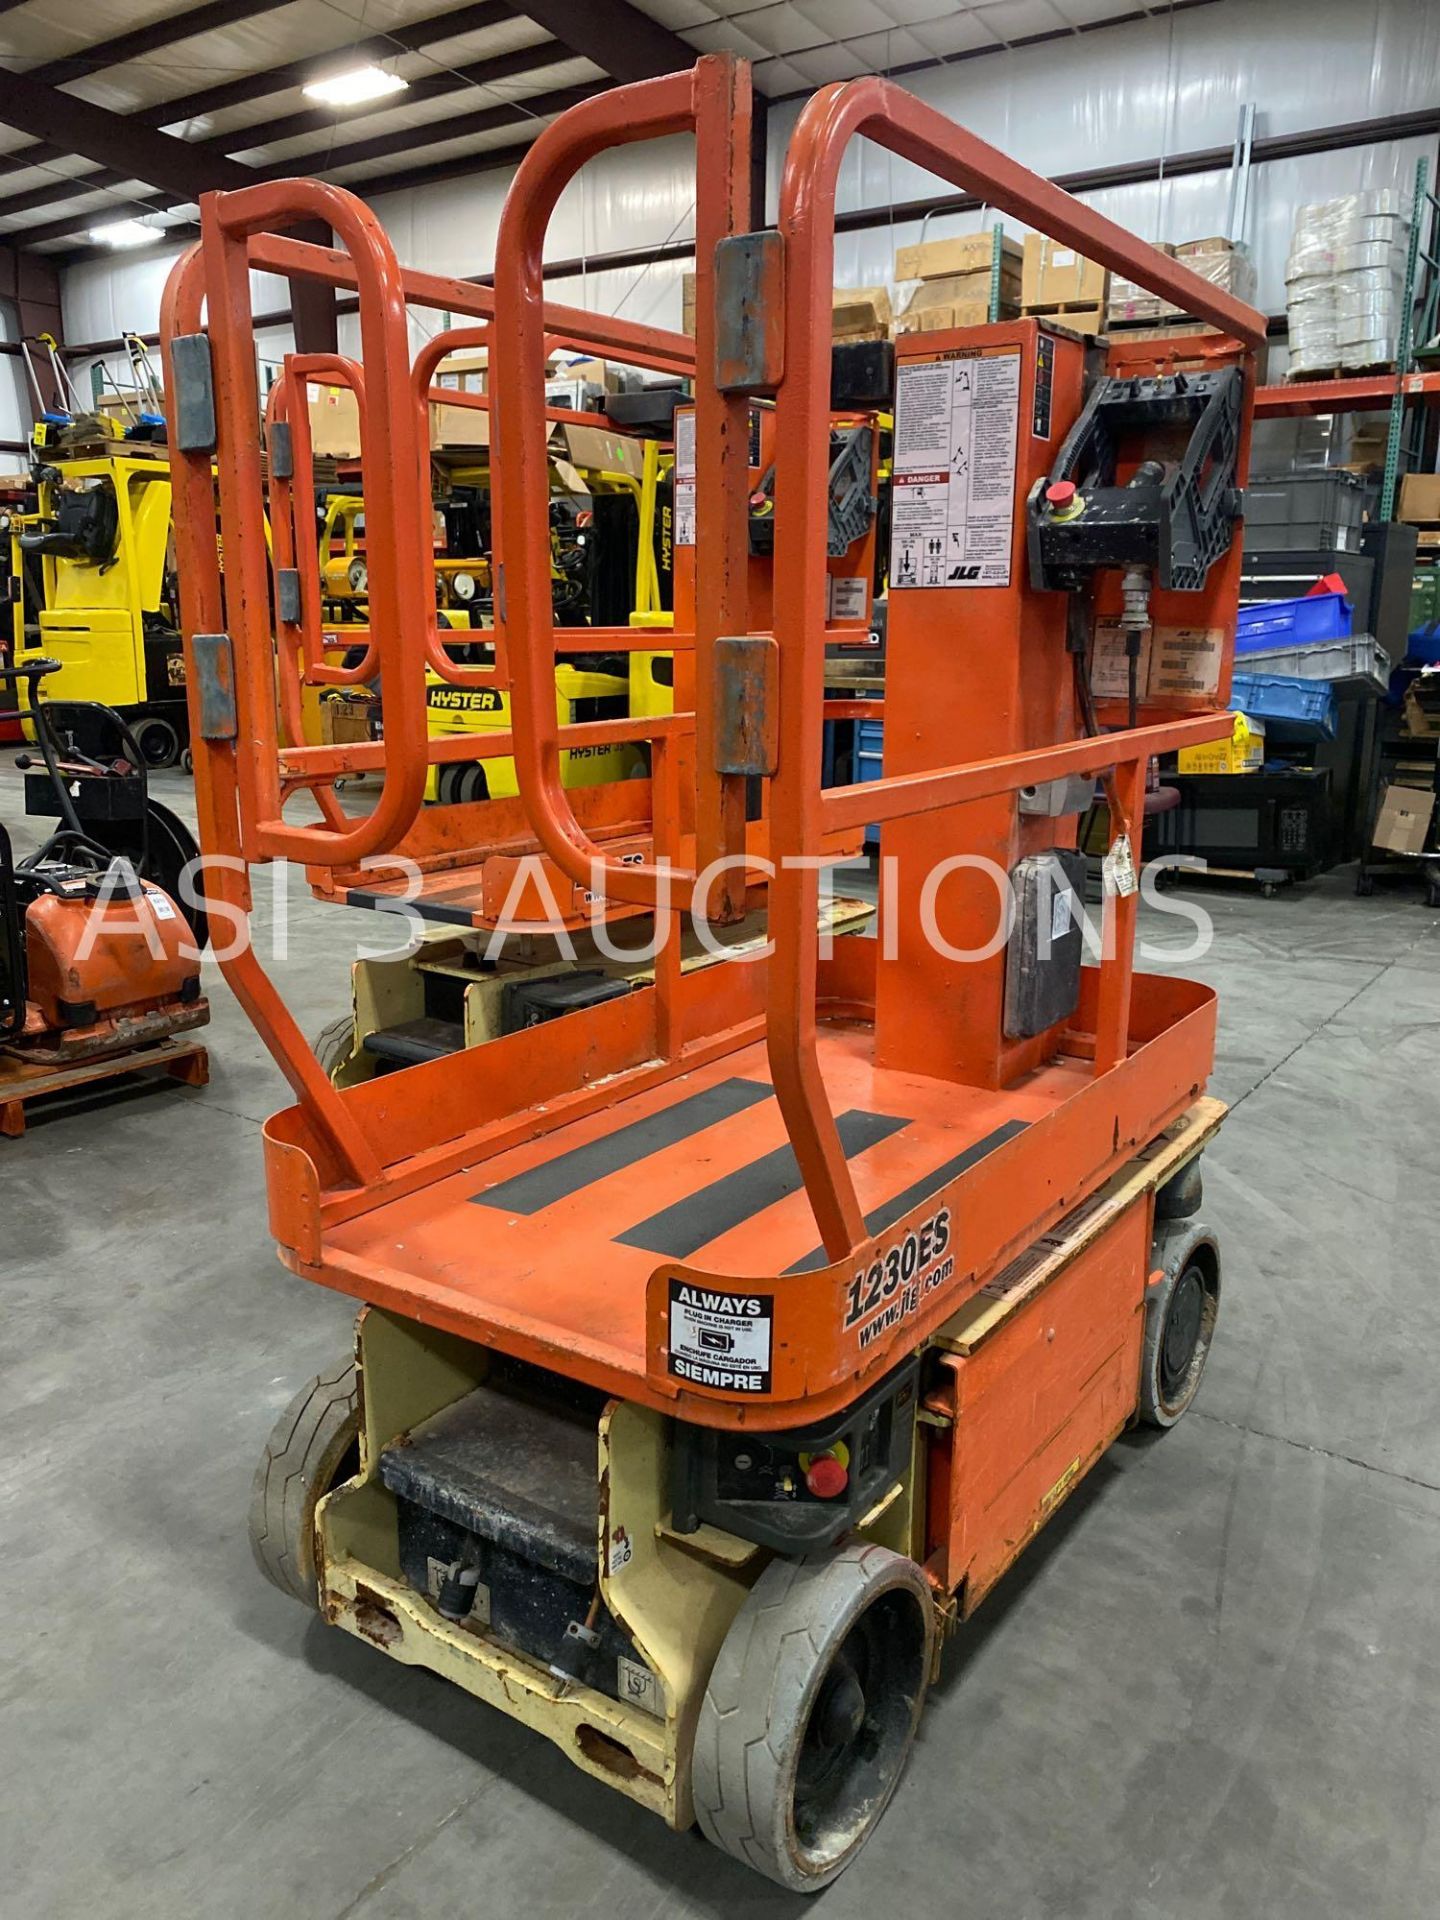 JLG ELECTRIC MAN LIFT MODEL 1230ES, 12' PLATFORM HEIGHT, SELF PROPELLED, BUILT IN BATTERY CHARGER - Image 5 of 7